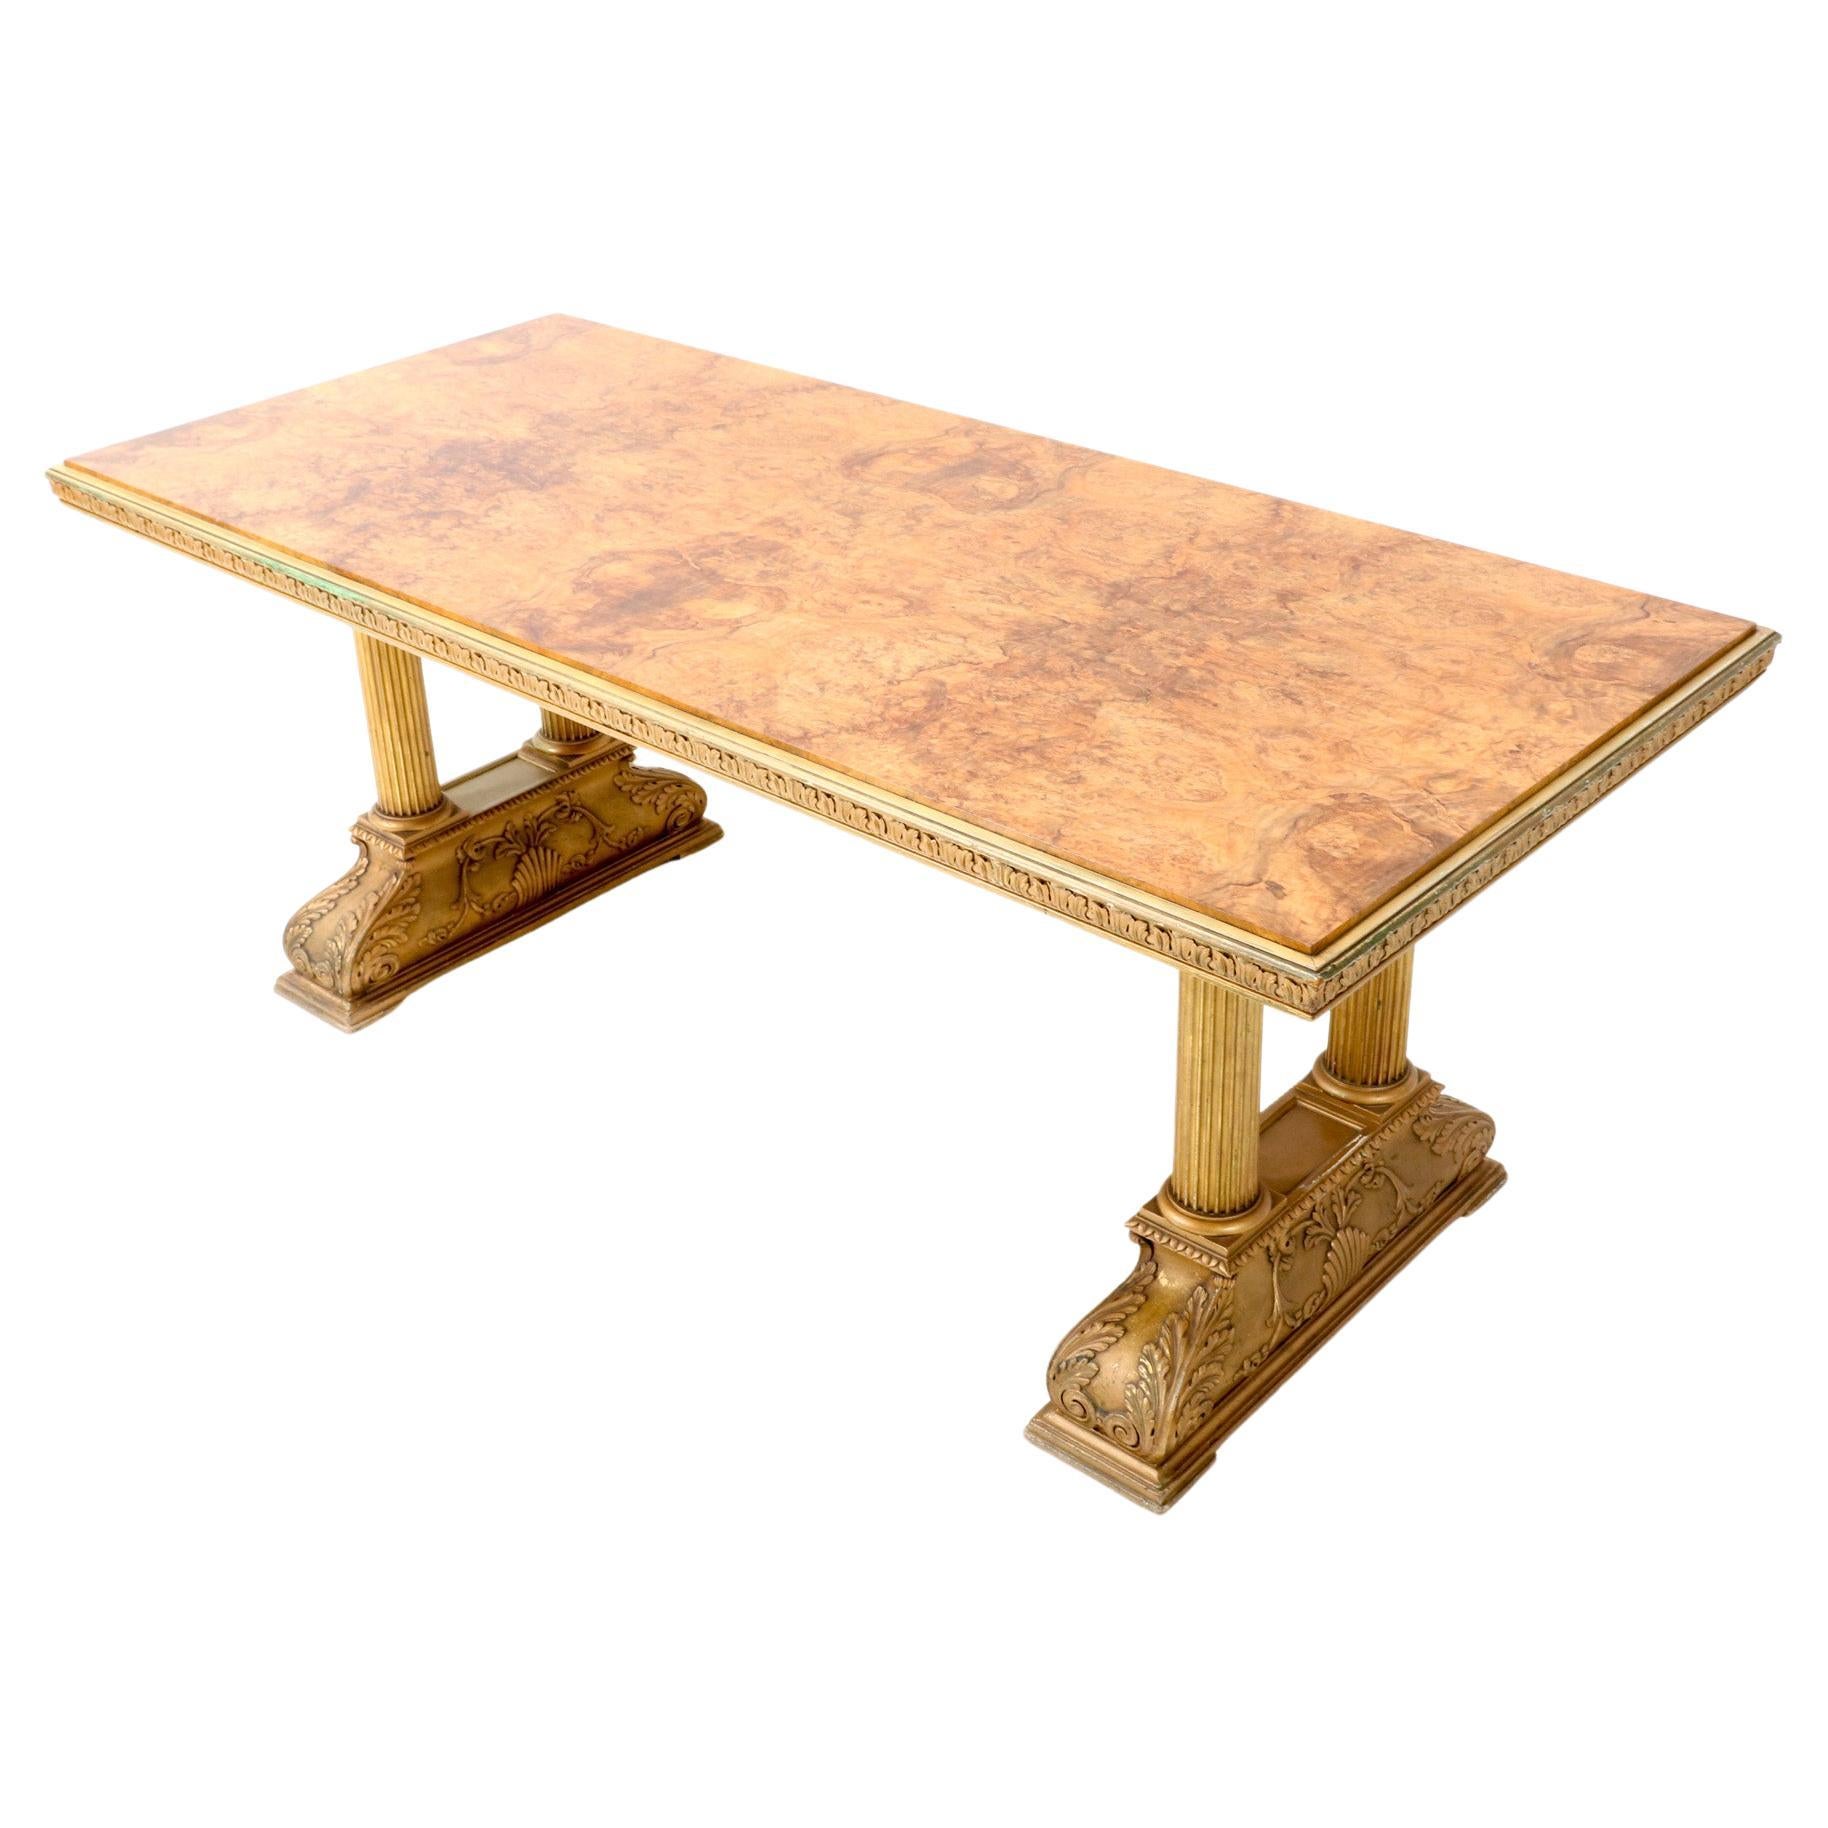 Dining Room Table Caesar by Axel Einar Hjorth with Original Extensions, 1920s For Sale